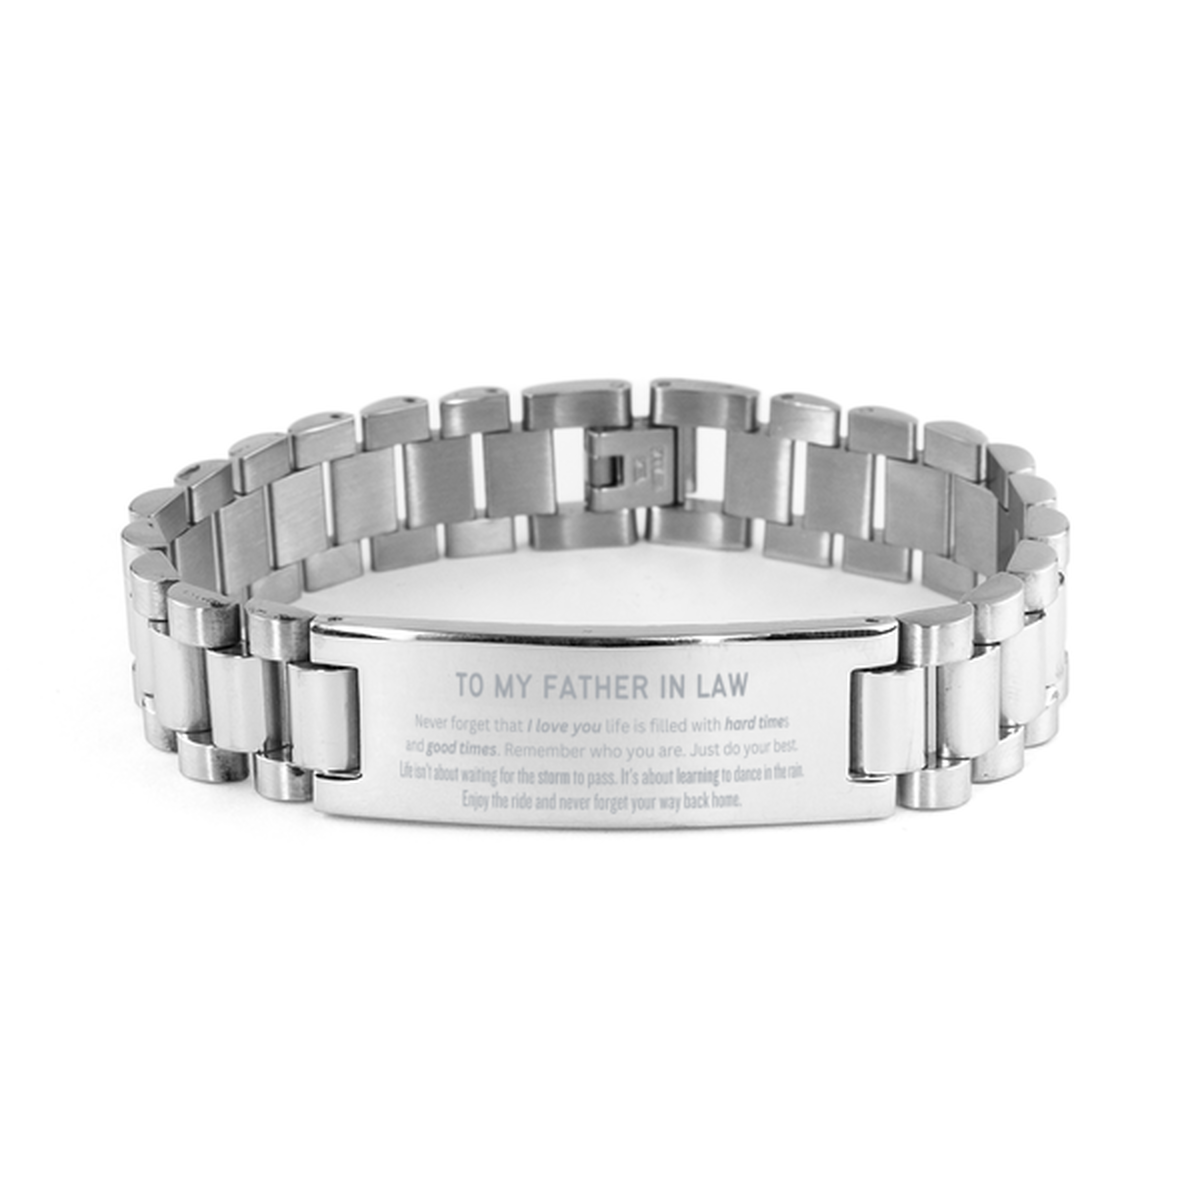 Christmas Father In Law Ladder Stainless Steel Bracelet Gifts, To My Father In Law Birthday Thank You Gifts For Father In Law, Graduation Unique Gifts For Father In Law To My Father In Law Never forget that I love you life is filled with hard times and go